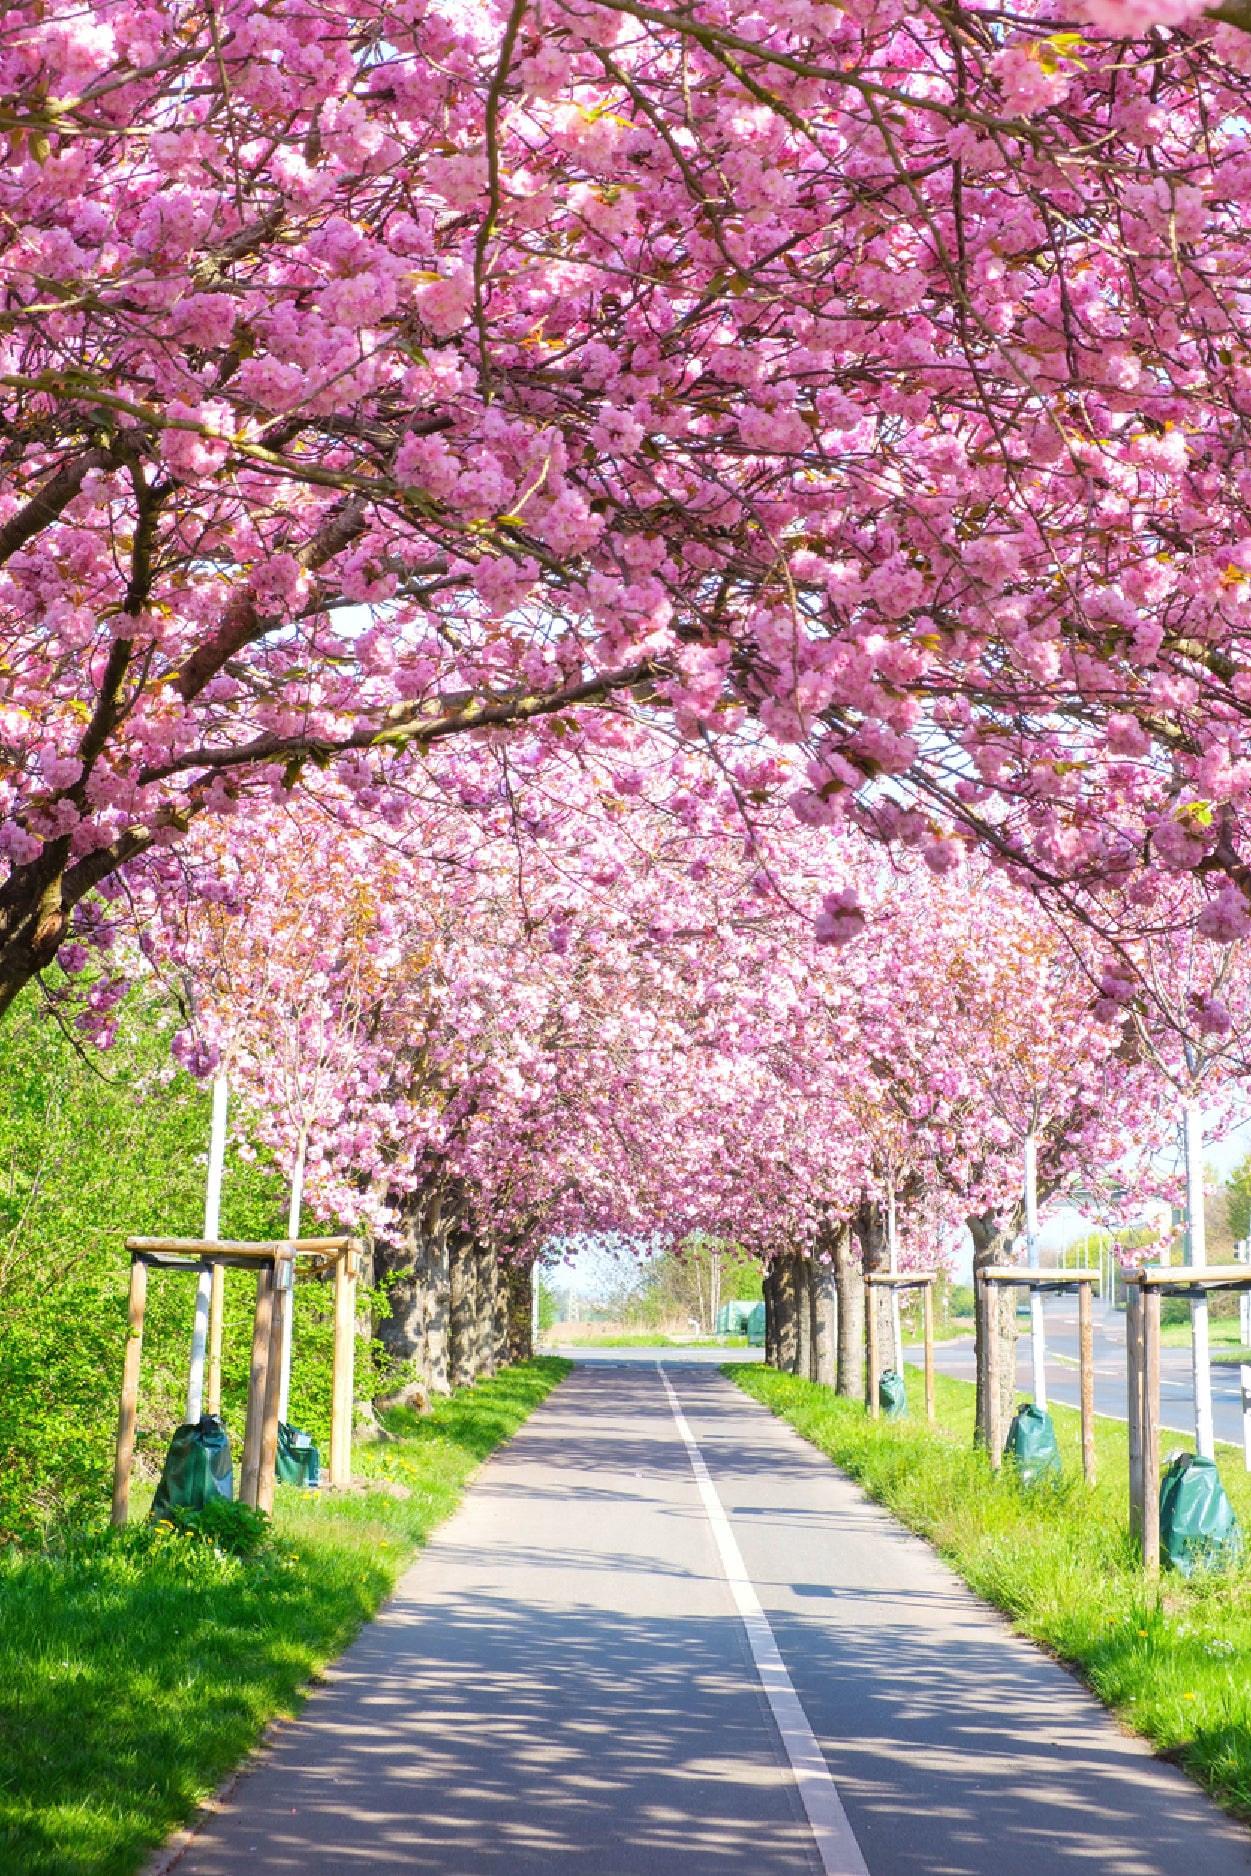 Blooming Pink Cherry Trees Spring Home Decor Premium Quality Poster Print Choose Your Sizes